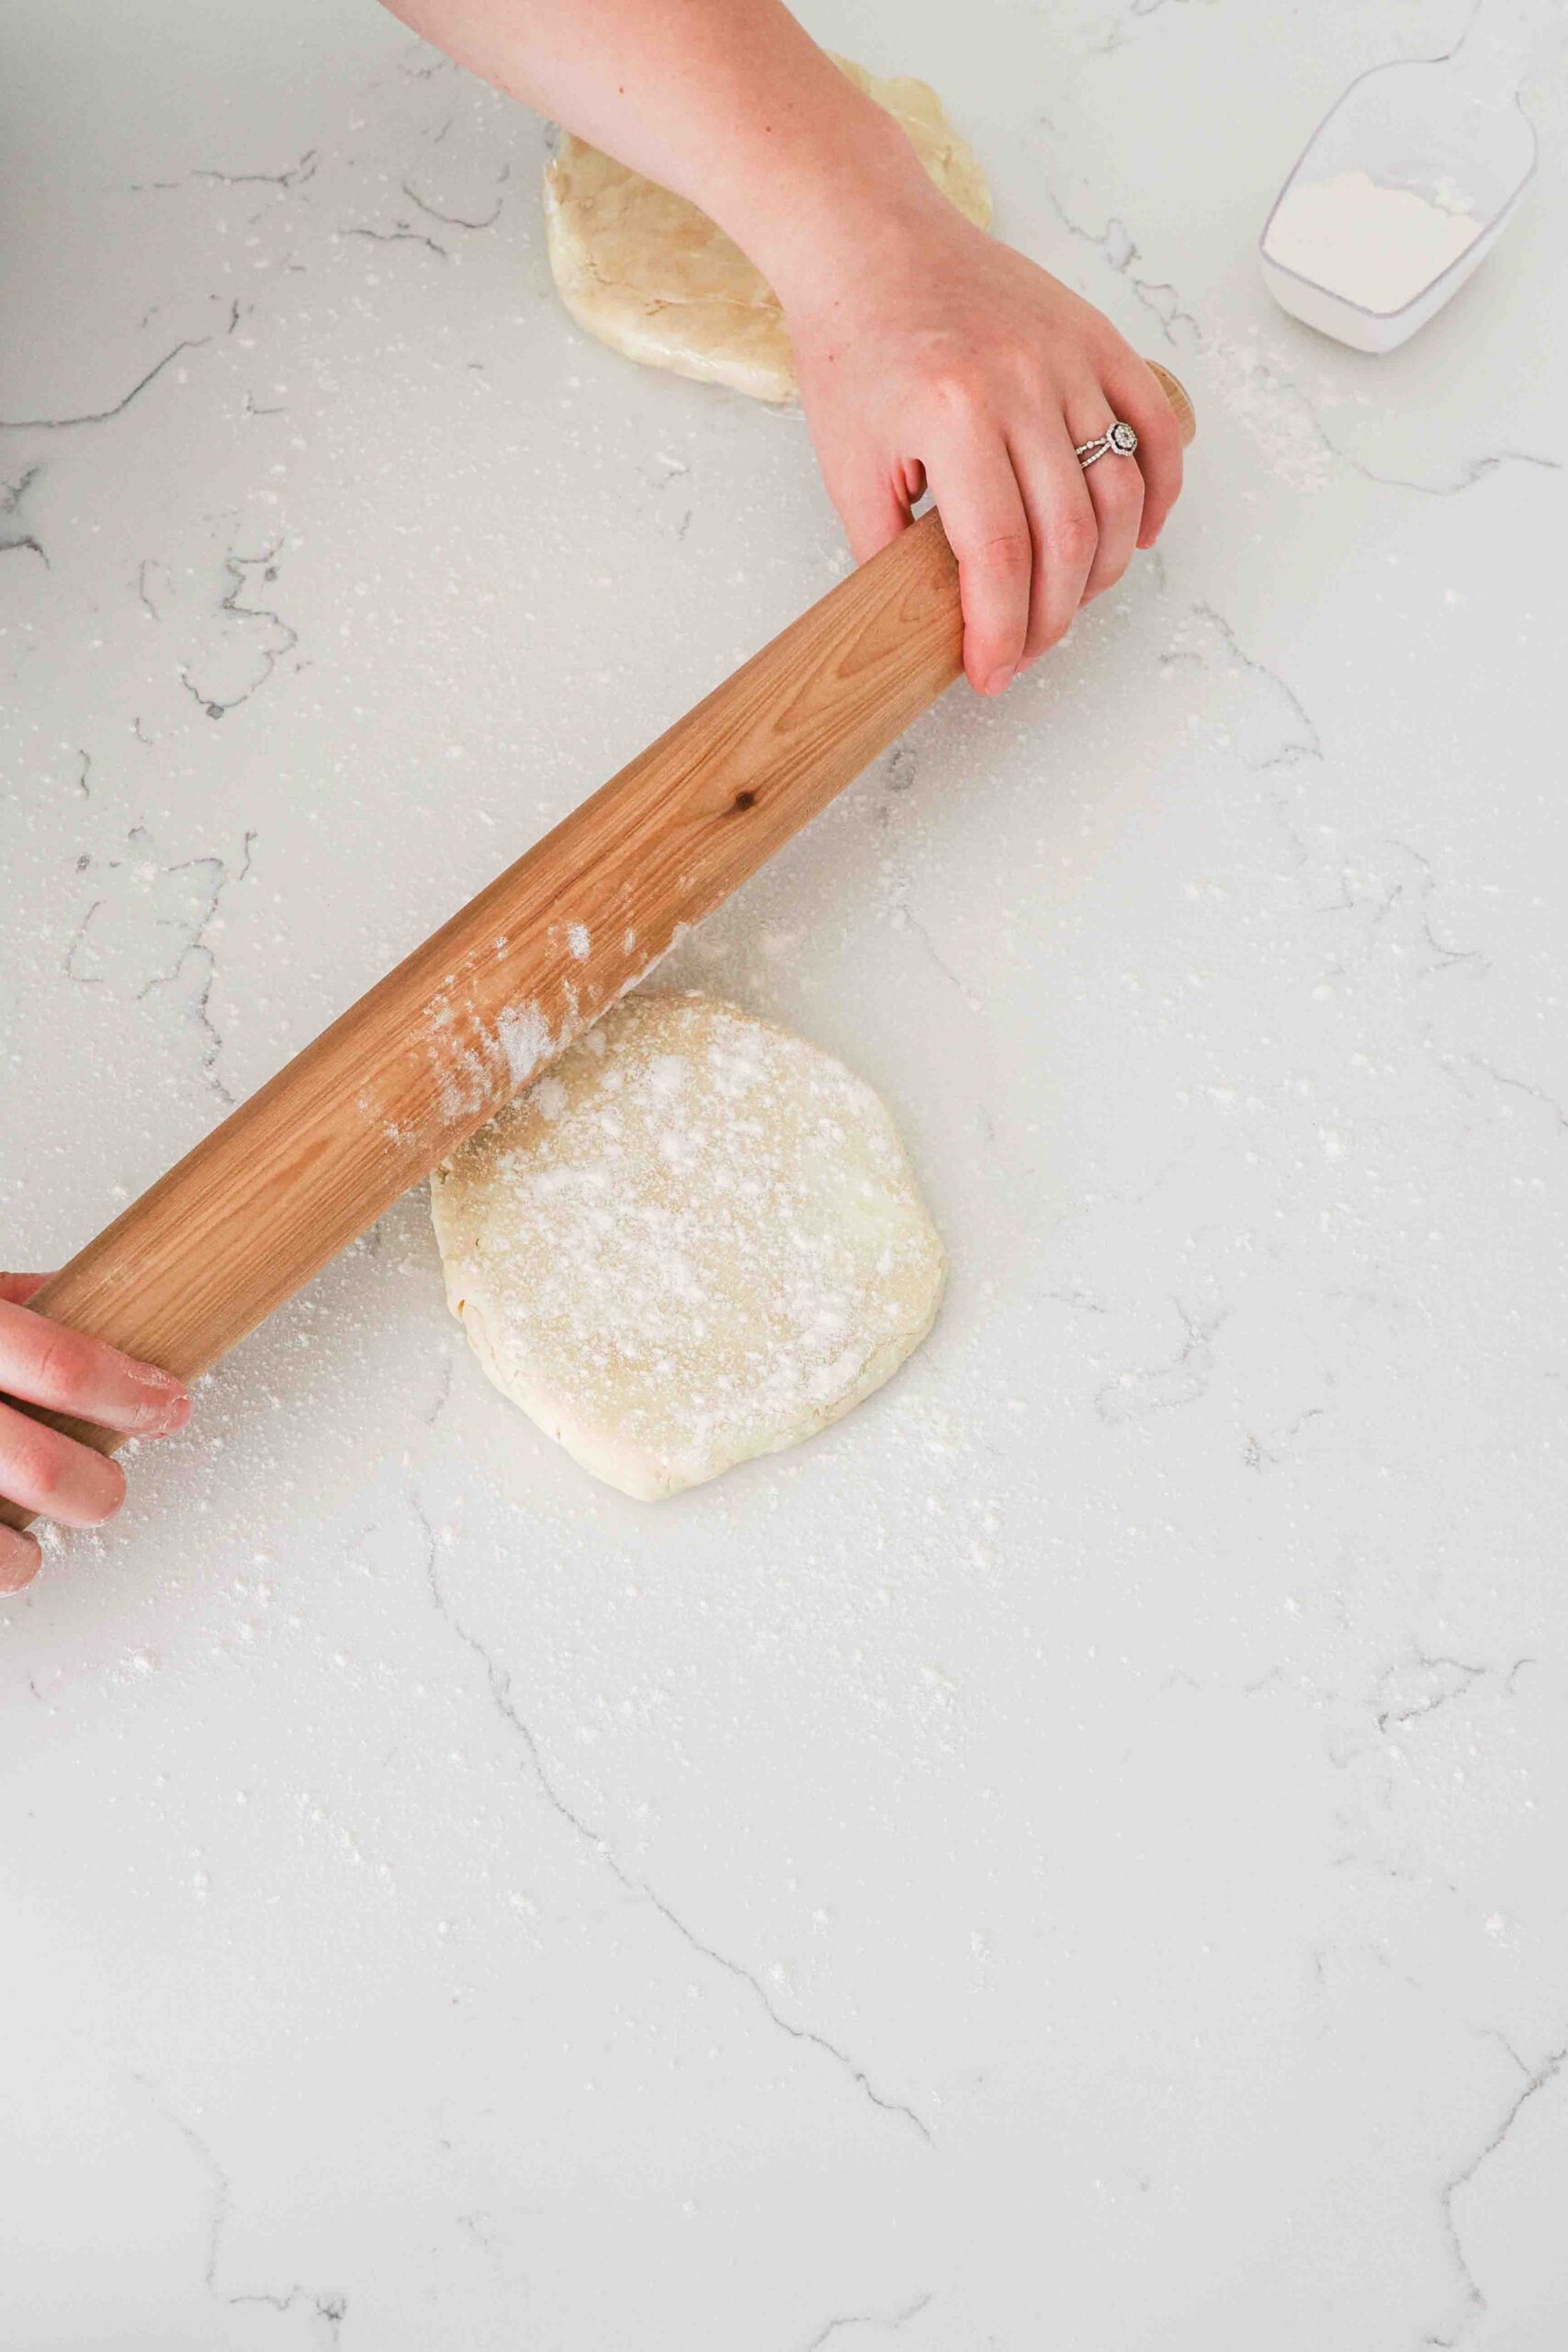 Two hands use a wooden rolling pin to flatten pie dough.